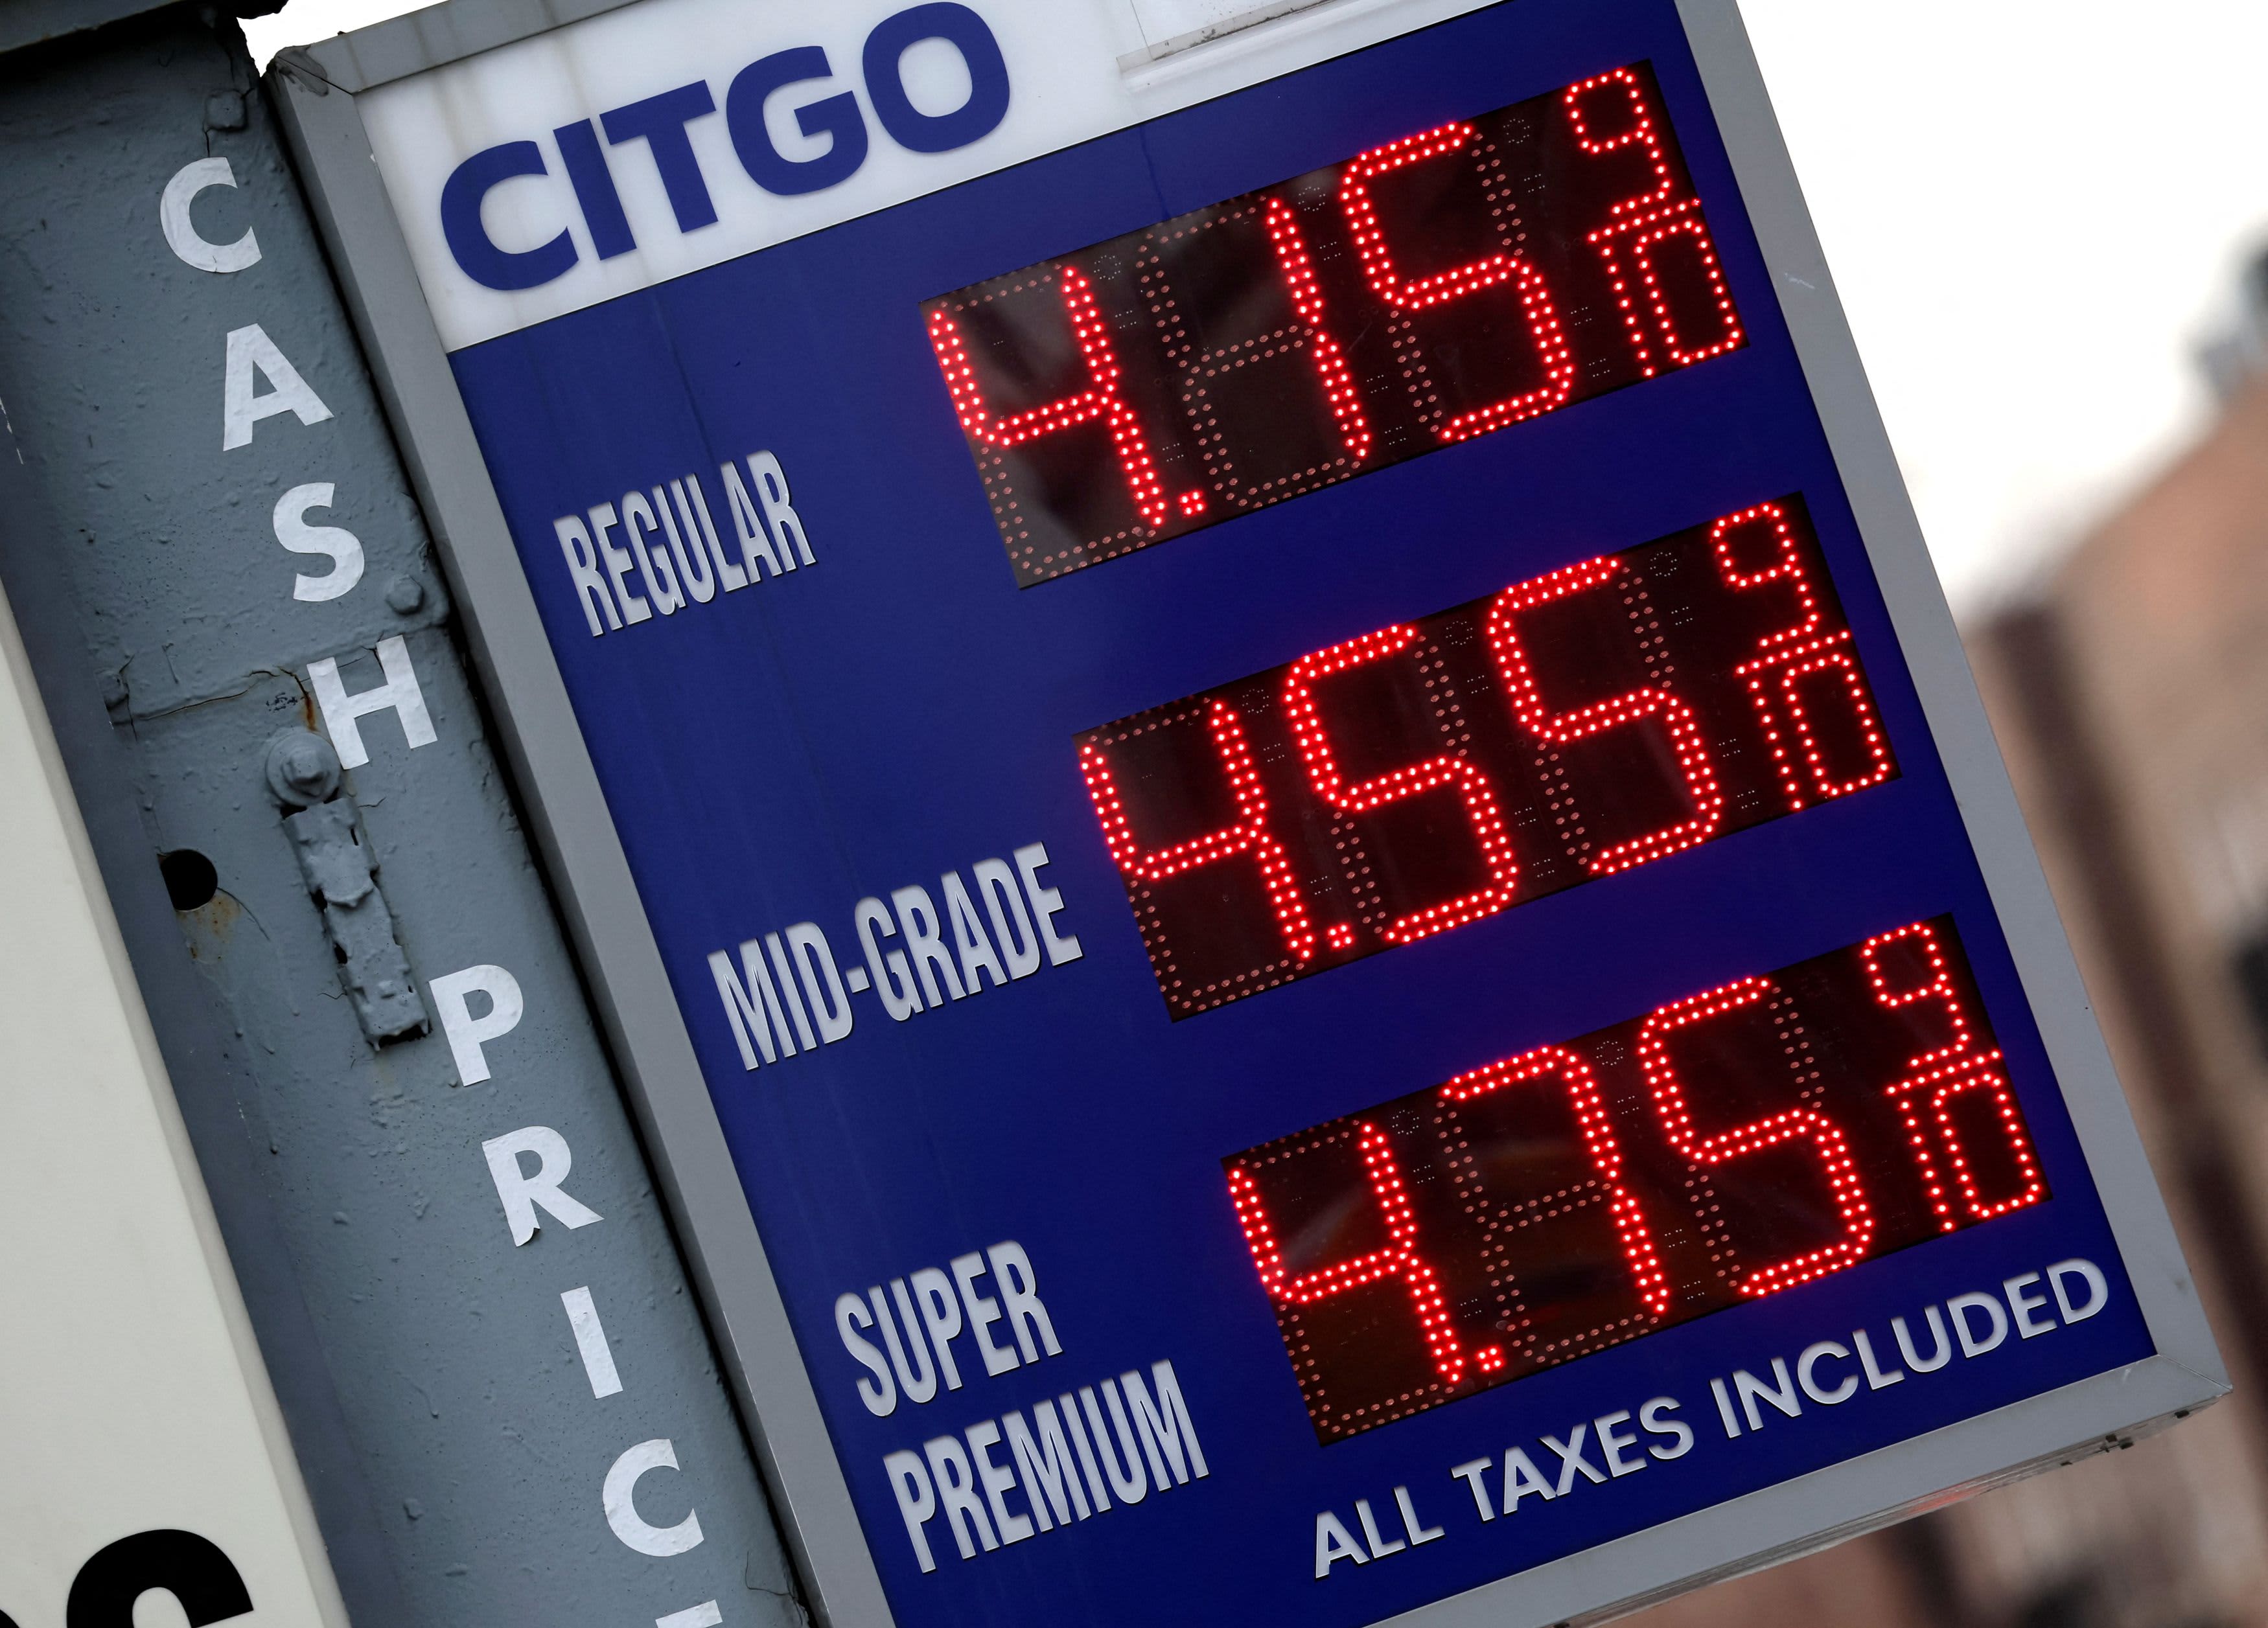 Consumer inflation was likely high in February, and rising fuel prices will turn up the pressure